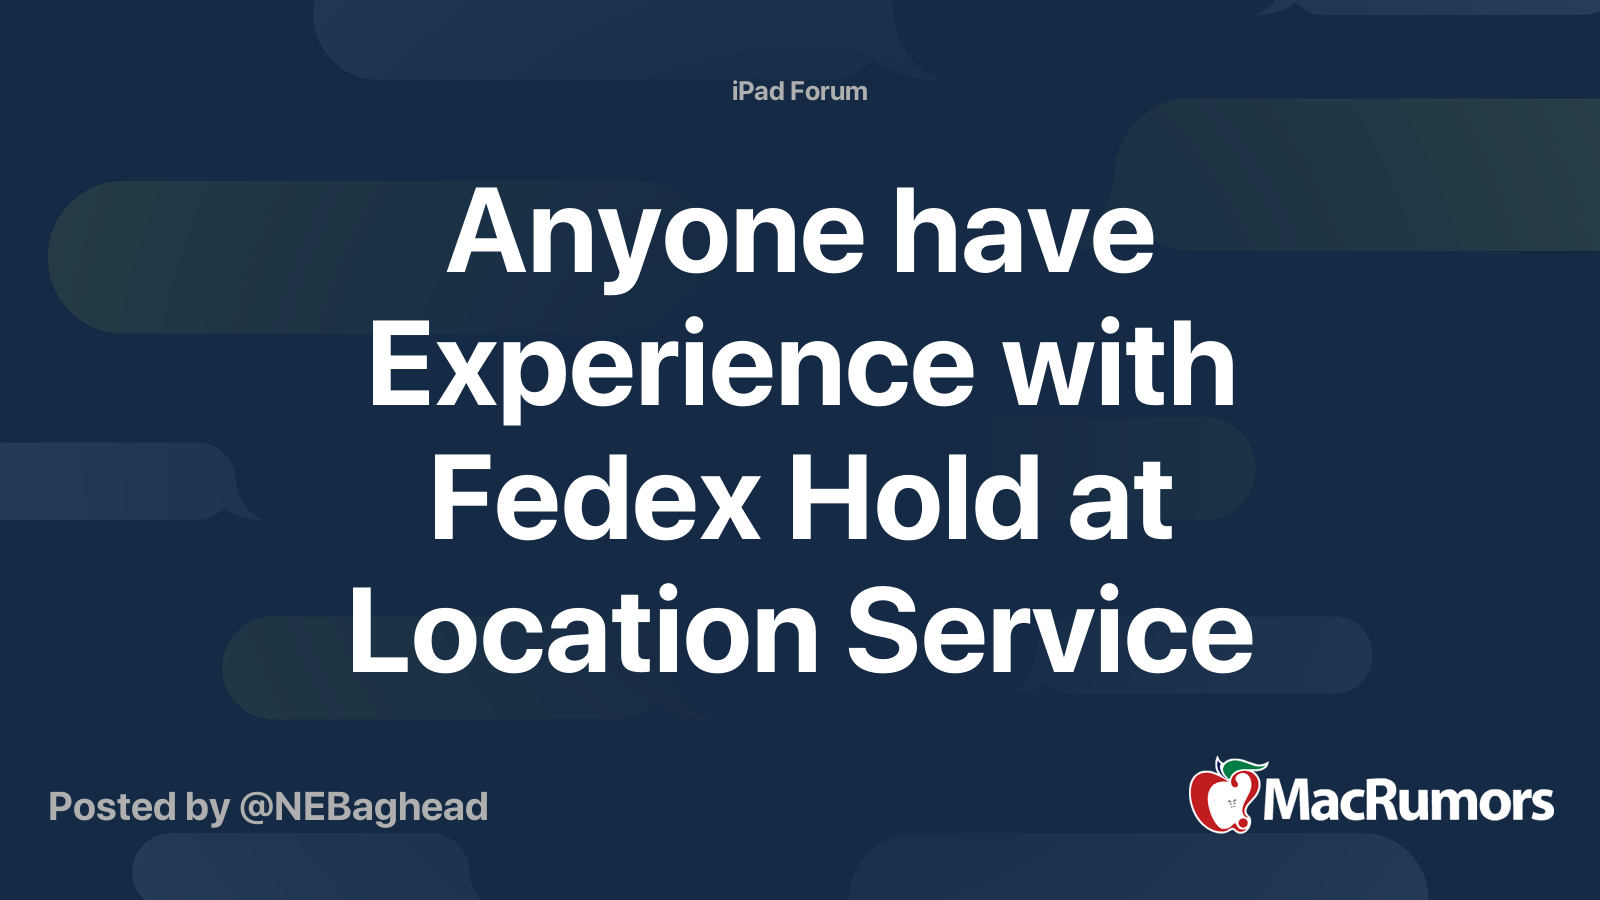 Is it faster to hold at a FedEx location? - Quora